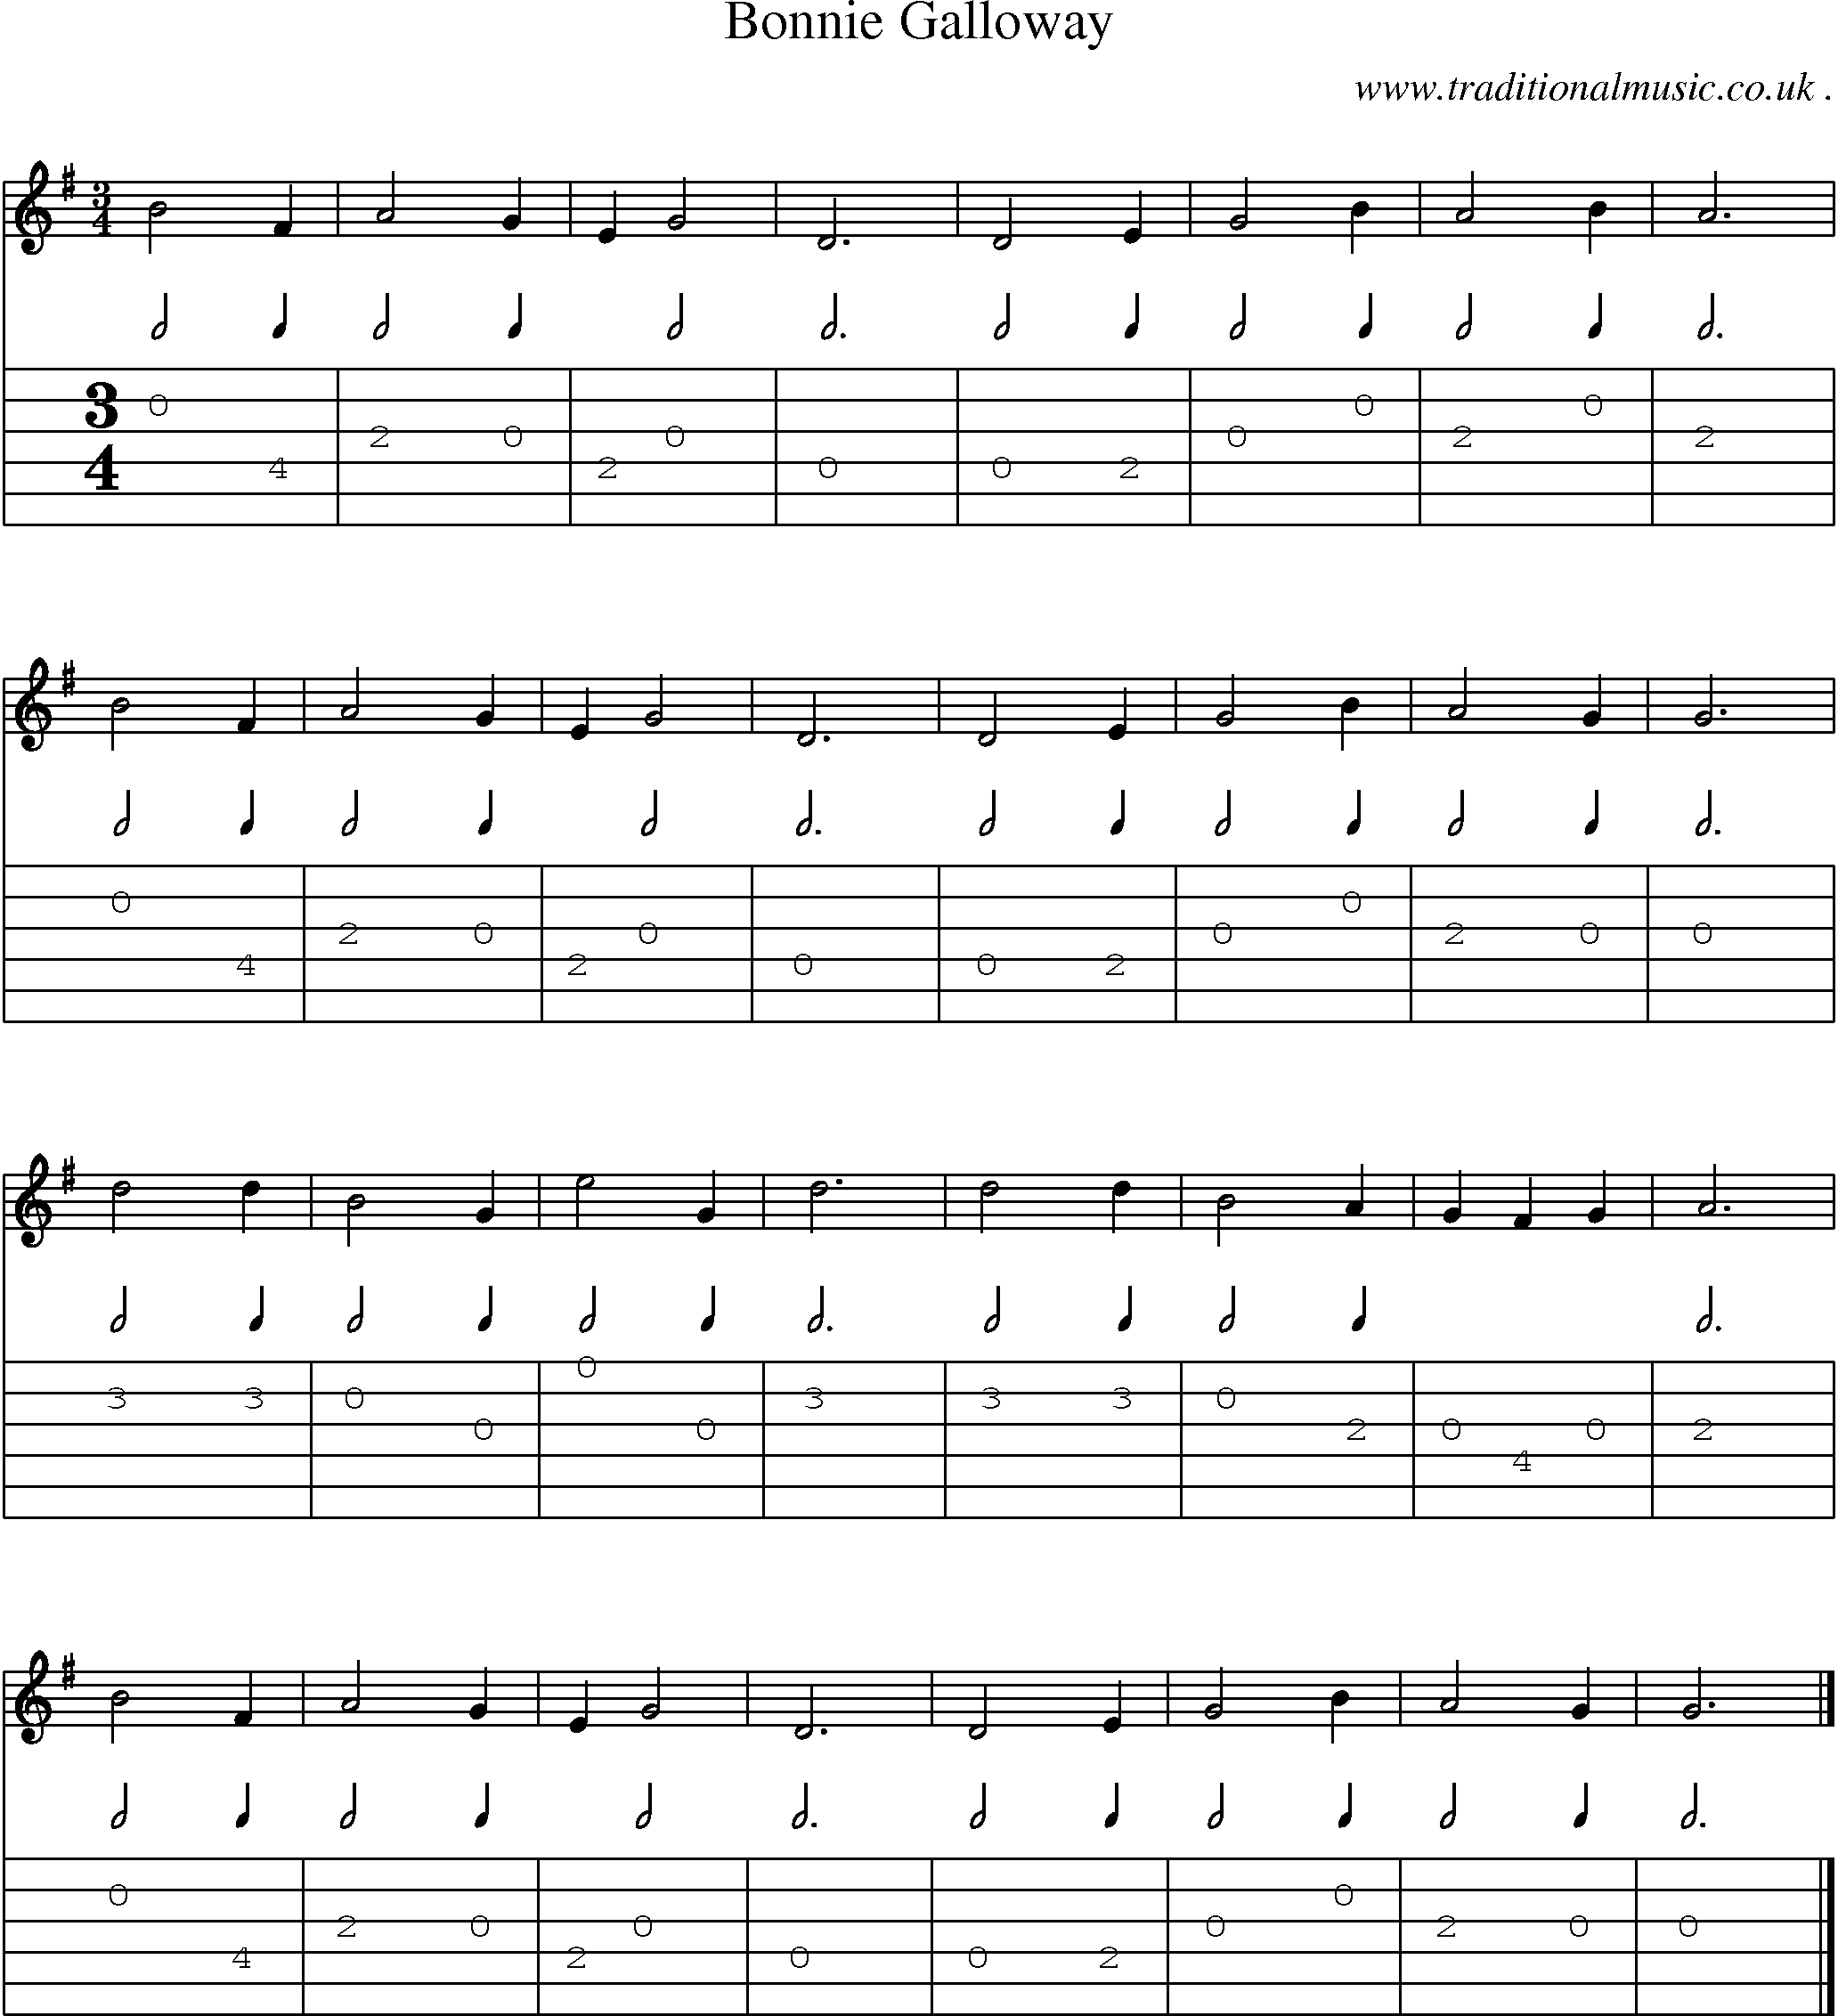 Sheet-music  score, Chords and Guitar Tabs for Bonnie Galloway